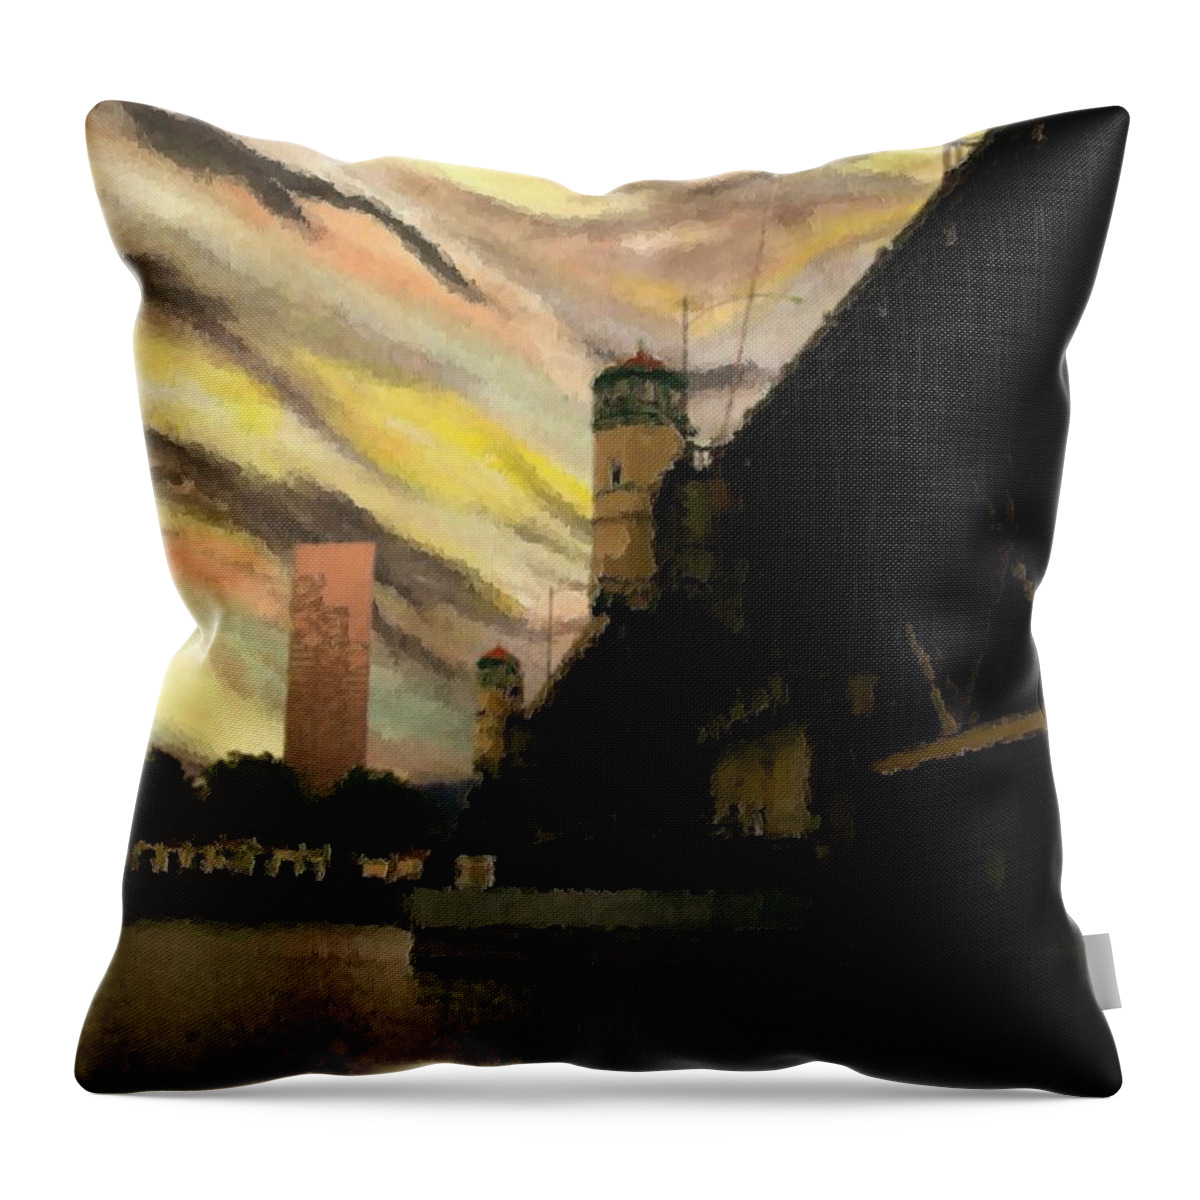 Burnside Bridge Throw Pillow featuring the photograph Empathically Challenged by Laureen Murtha Menzl